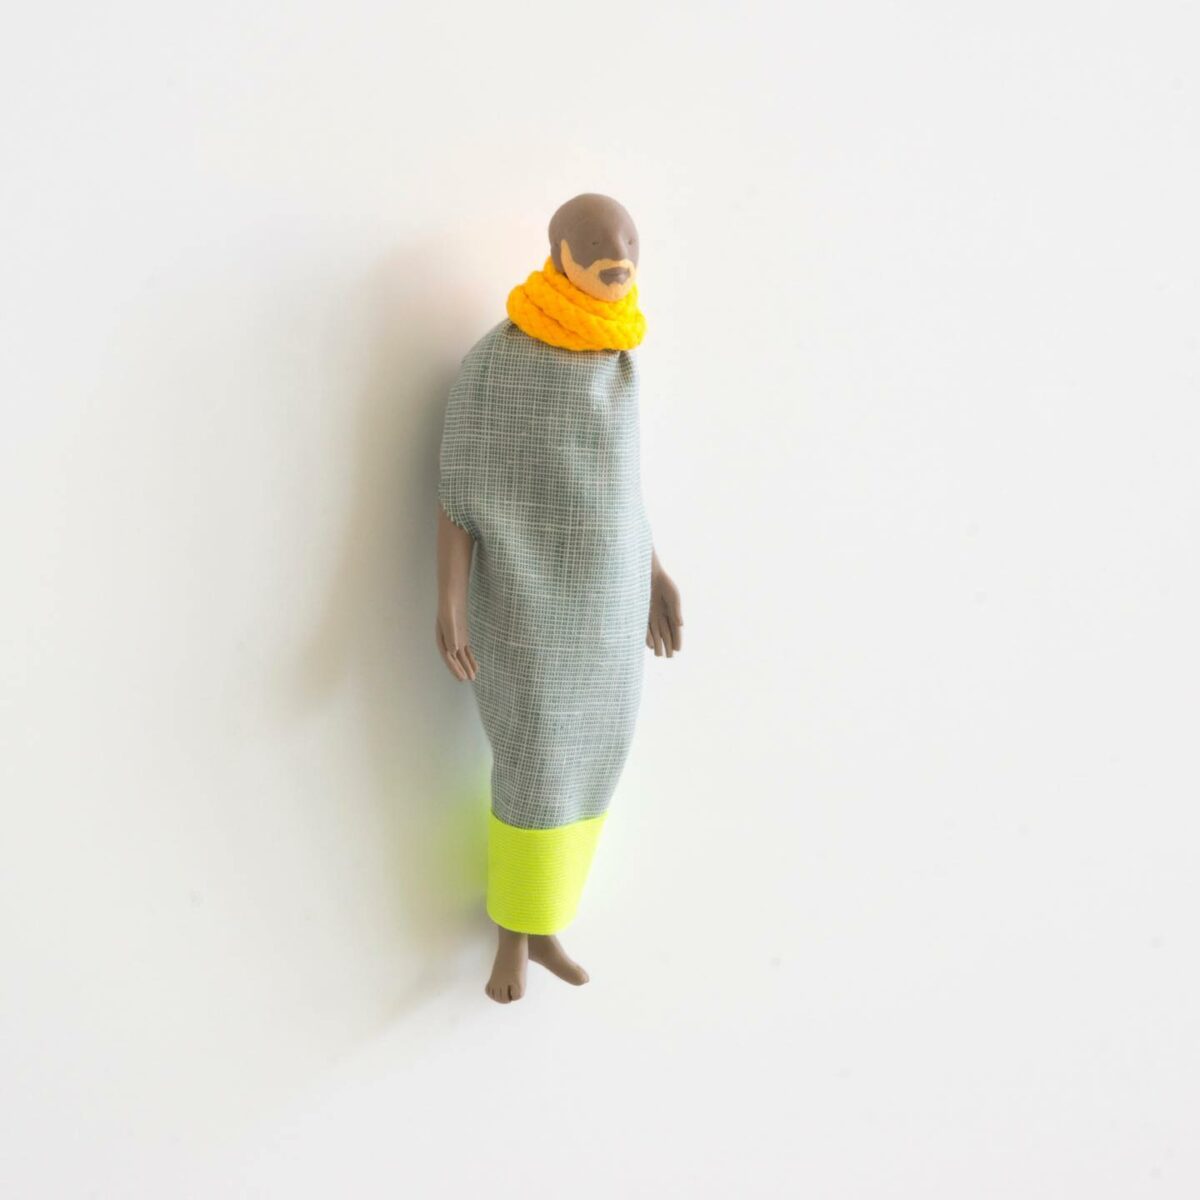 Peculiar Figure Sculptures In Vivid Colors By Frode Bolhuis (11)